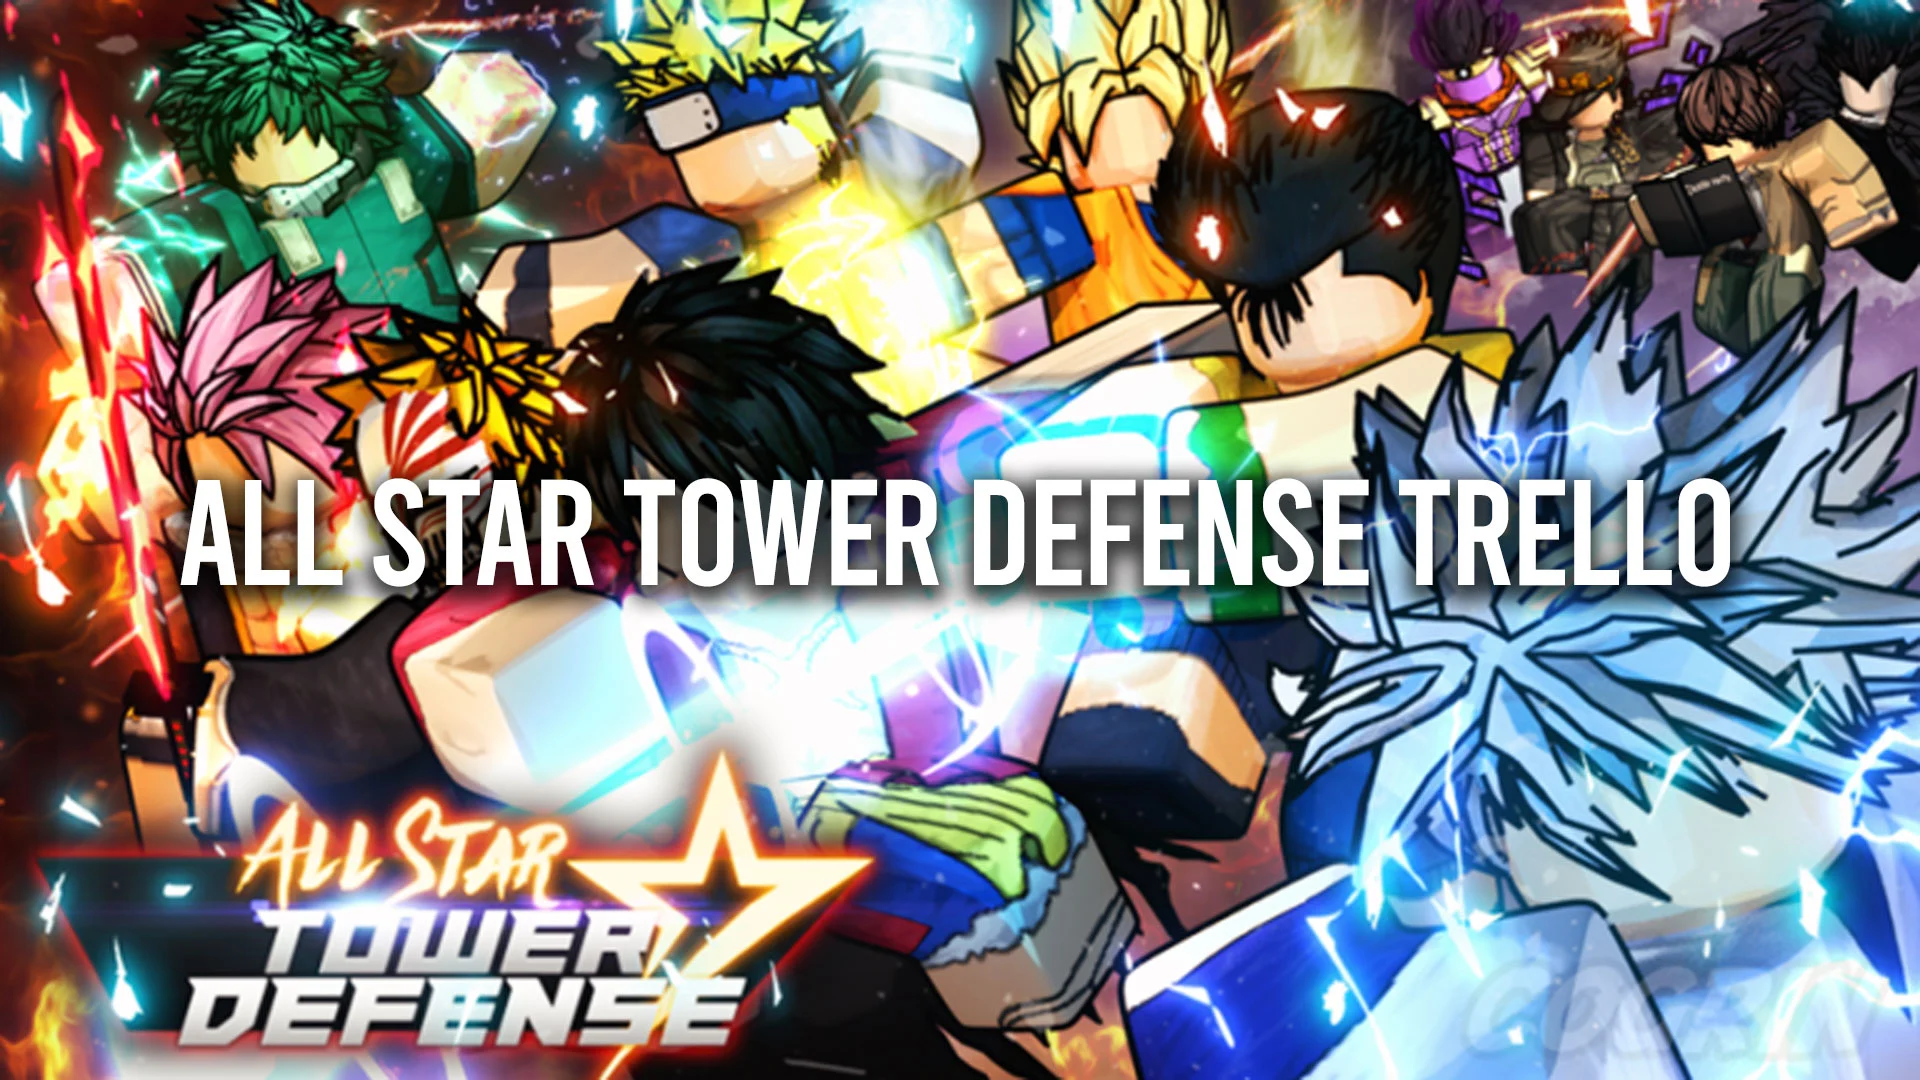 All Star Tower Defense featured image, Trello and Discord